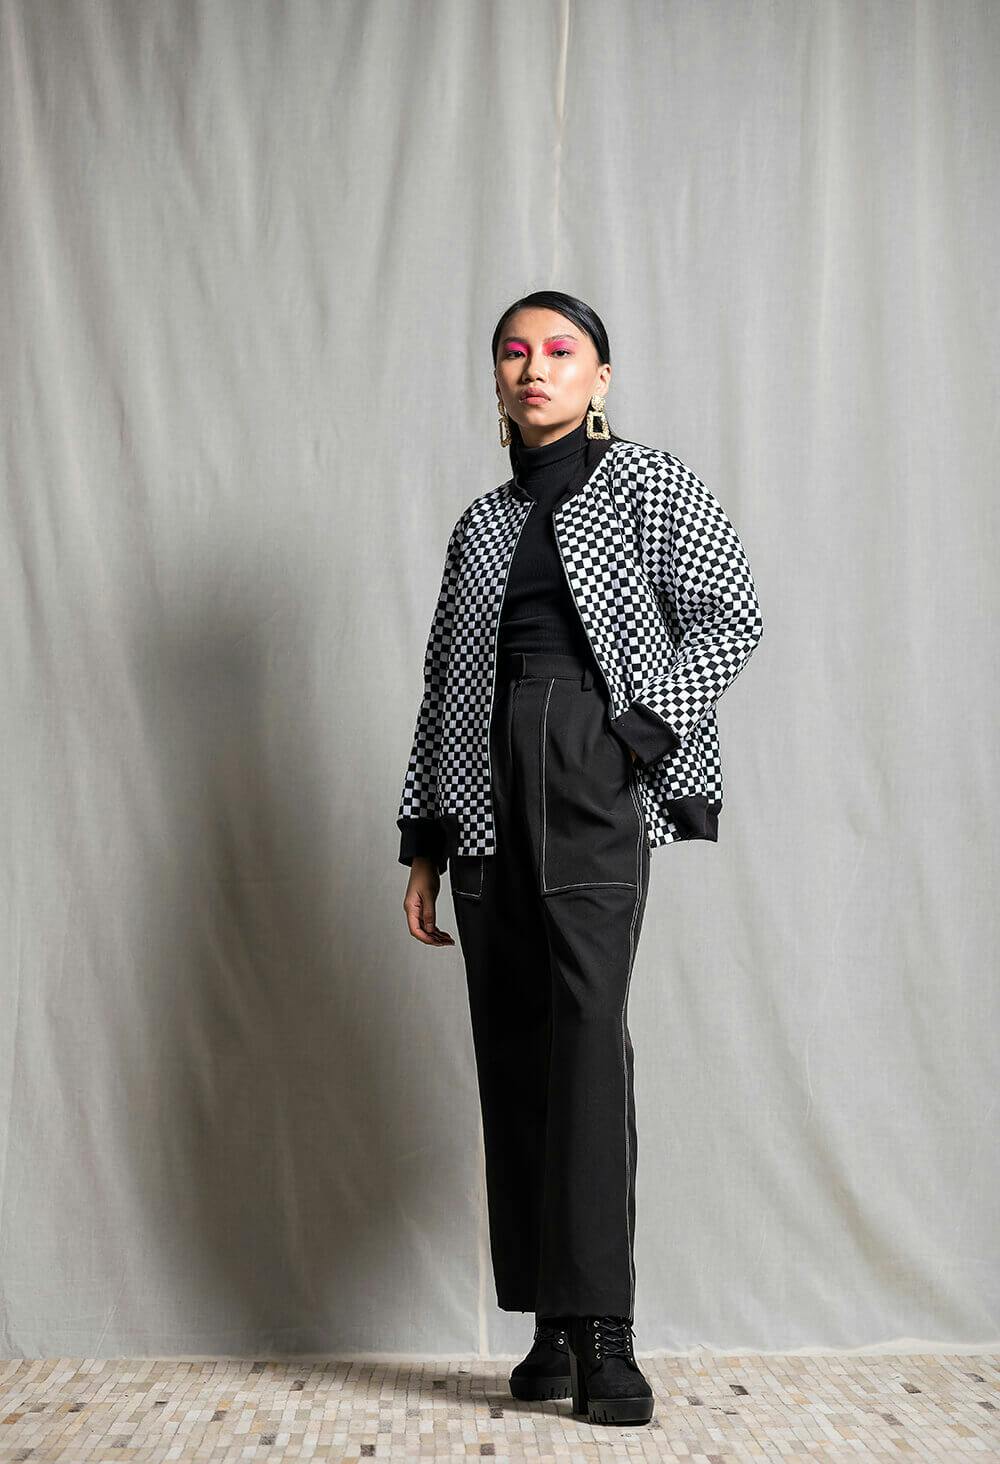 Woven Checkered Bomber, a product by Corpora Studio